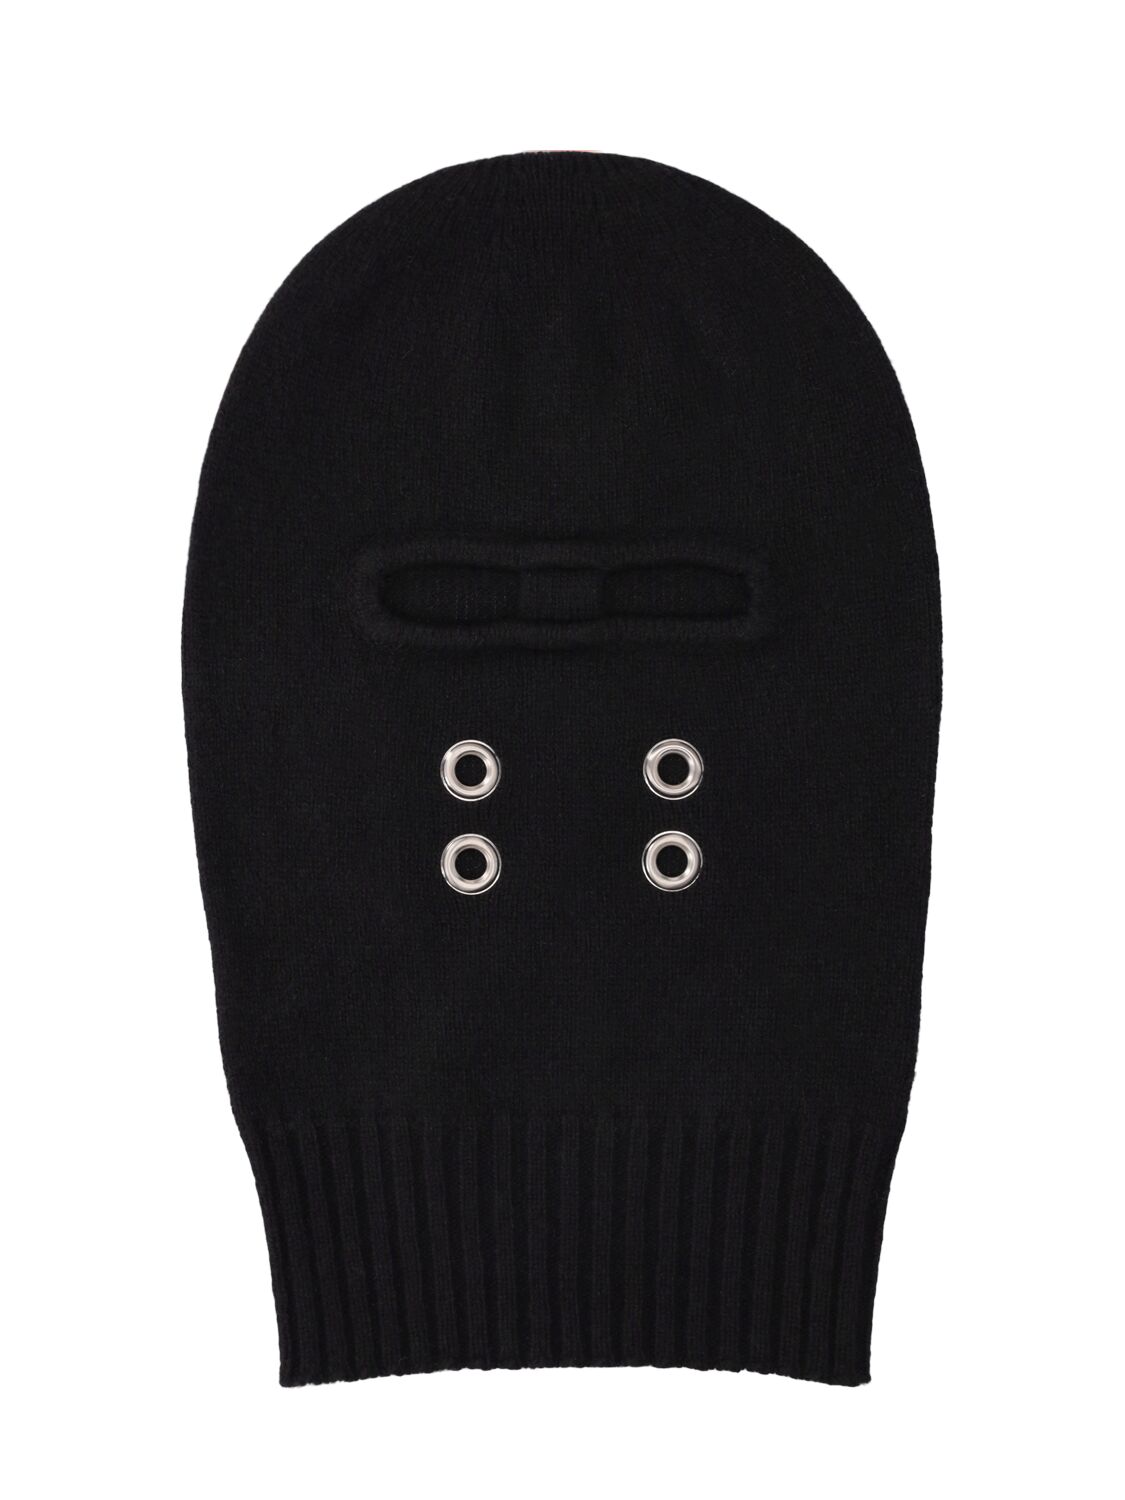 Gimp Recycled Cashmere Balaclava – MEN > ACCESSORIES > HATS